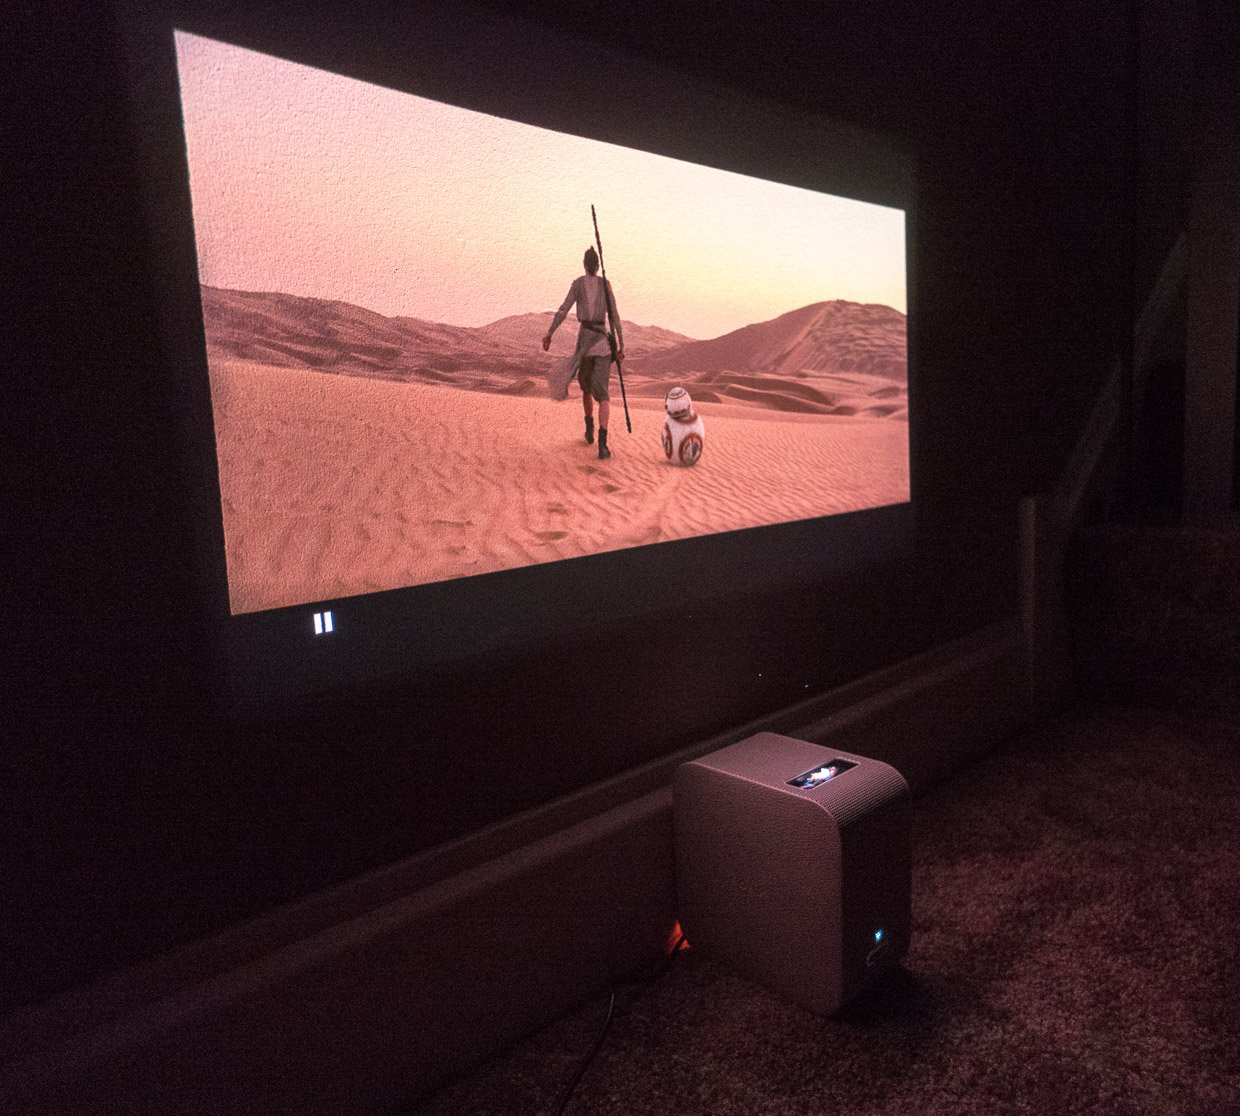 Hands-on: Sony LSPX-P1 Projector